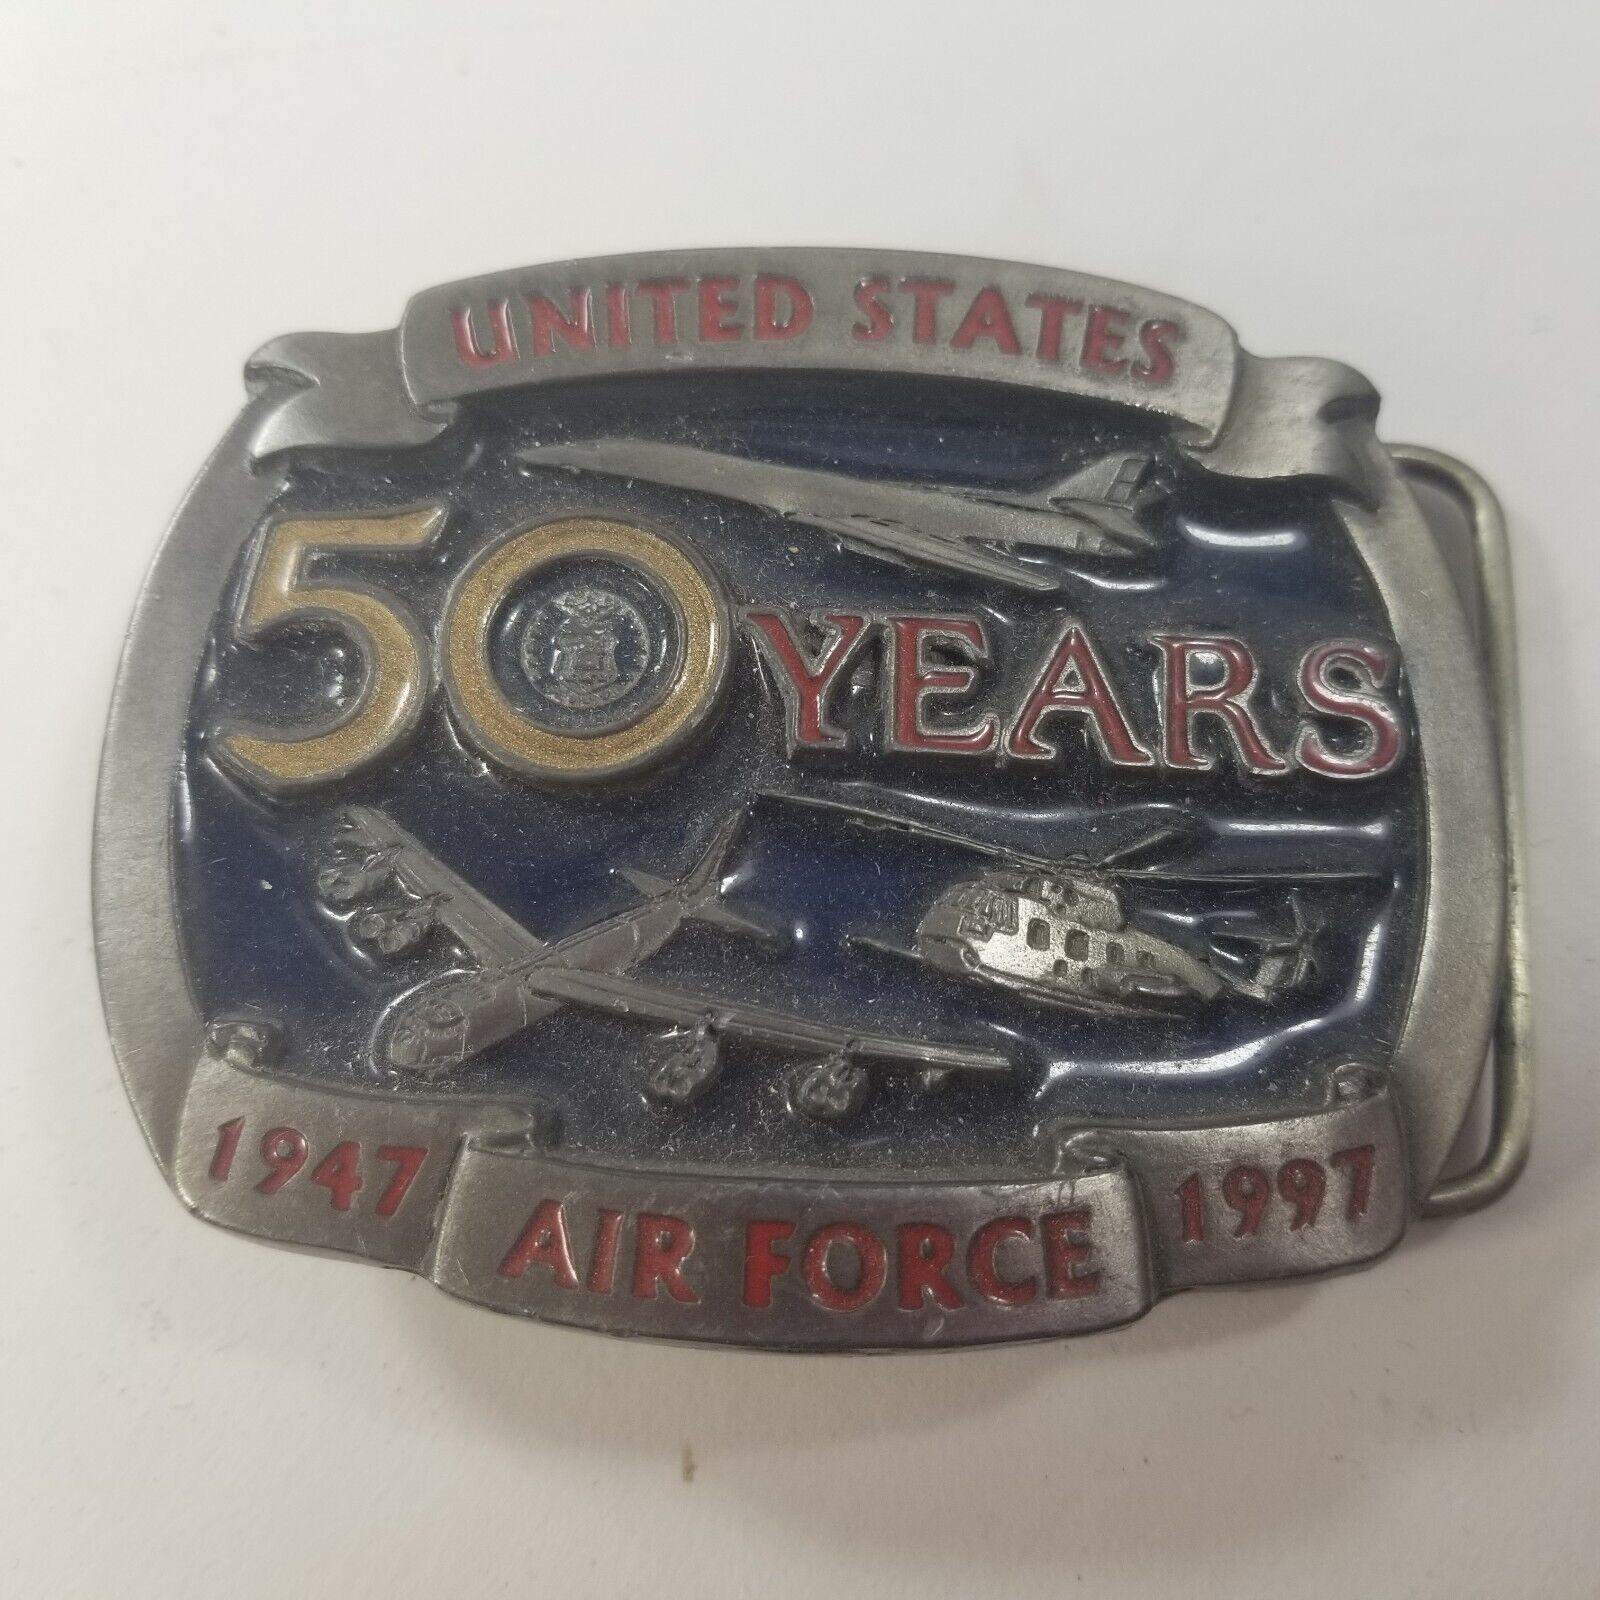 1997 United States Air Force 50 Year Anniversary Belt Buckle